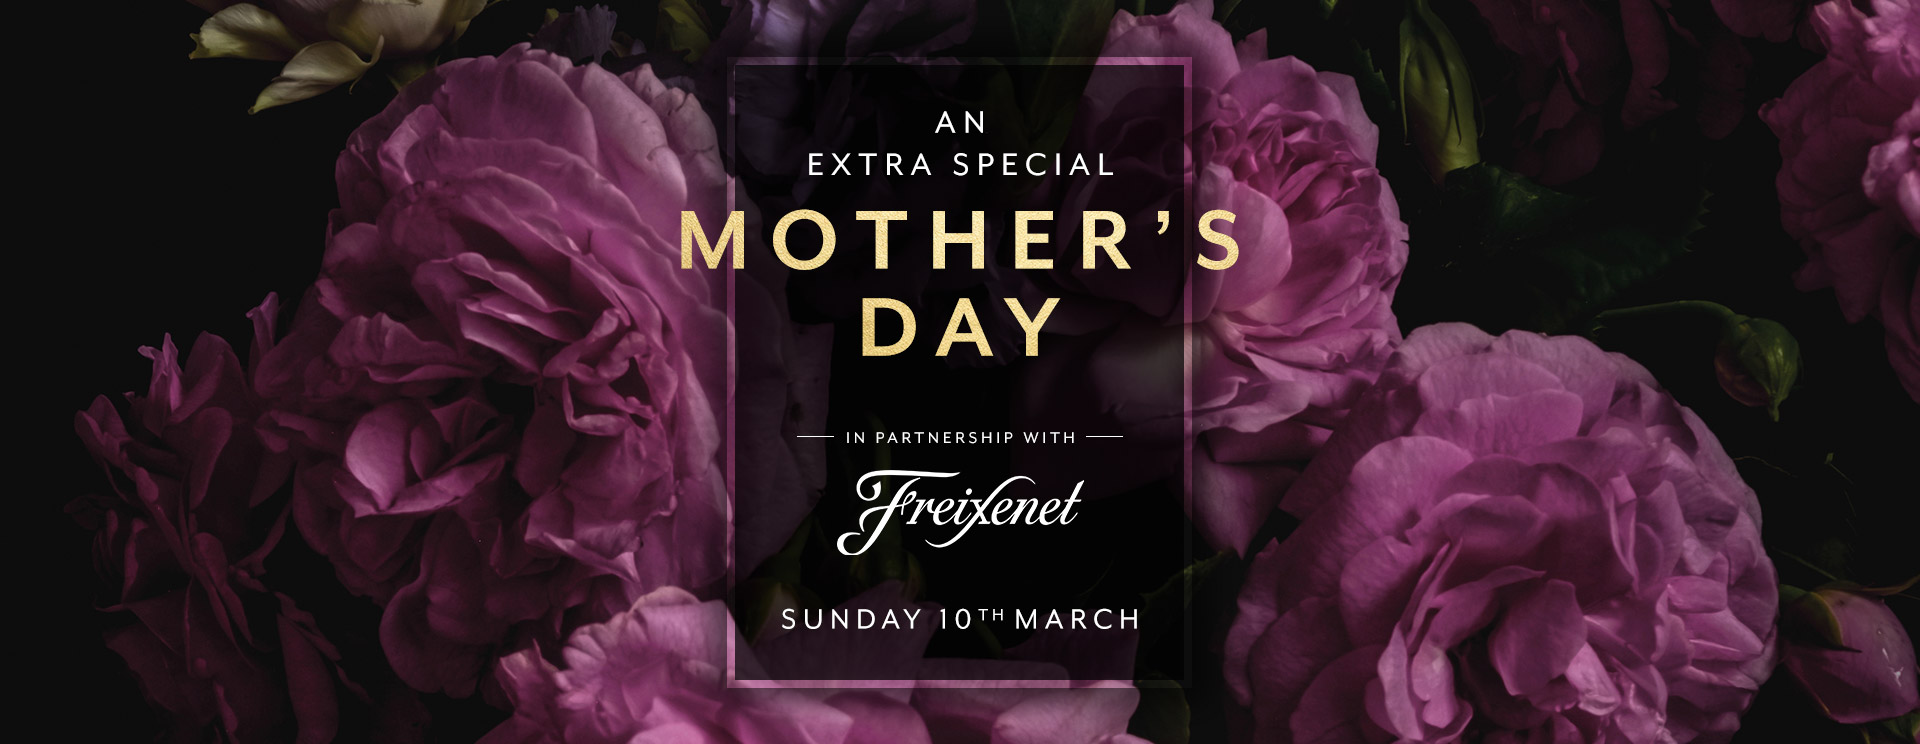 Mother’s Day menu/meal in Liverpool